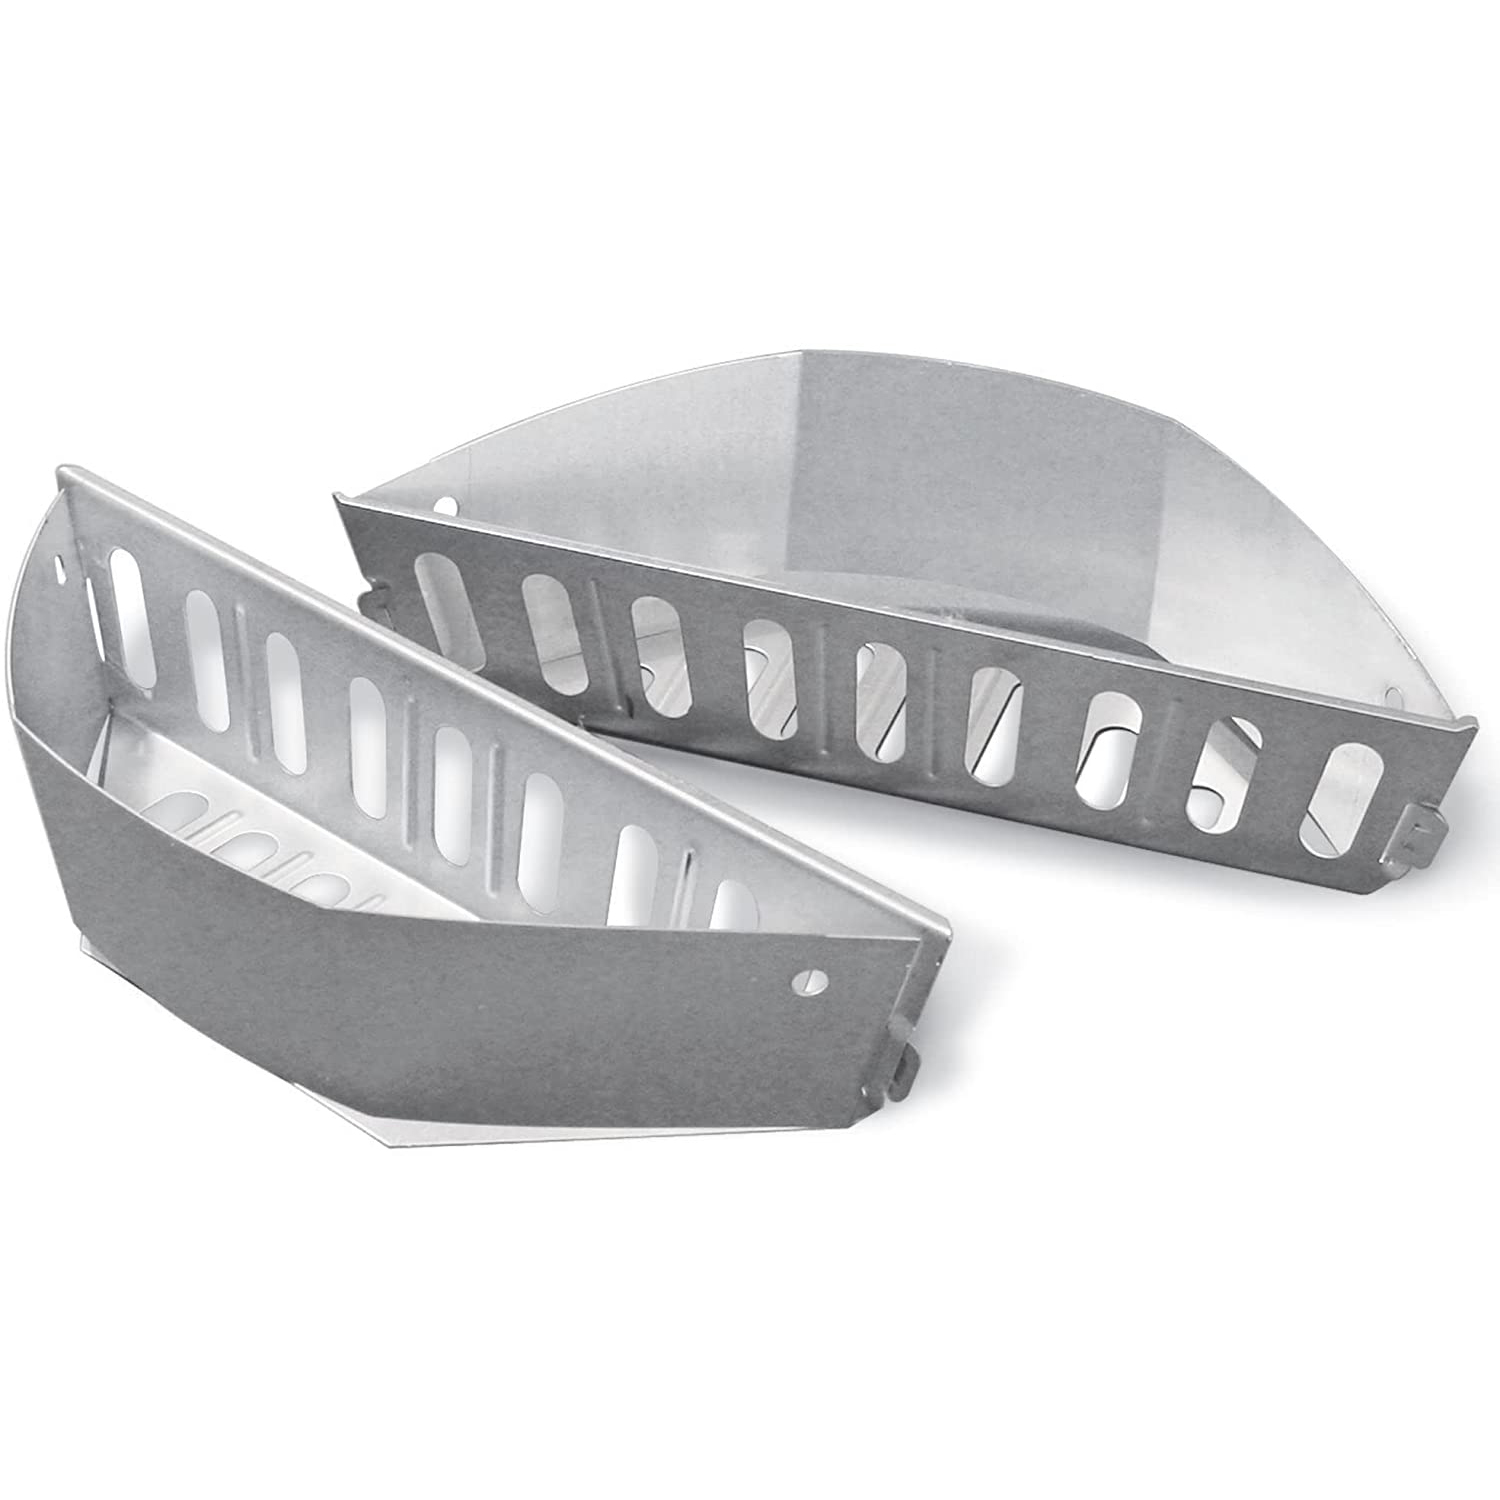 Photos - BBQ Accessory Weber Char-Basket Charcoal Holders, Set of 2 7403 